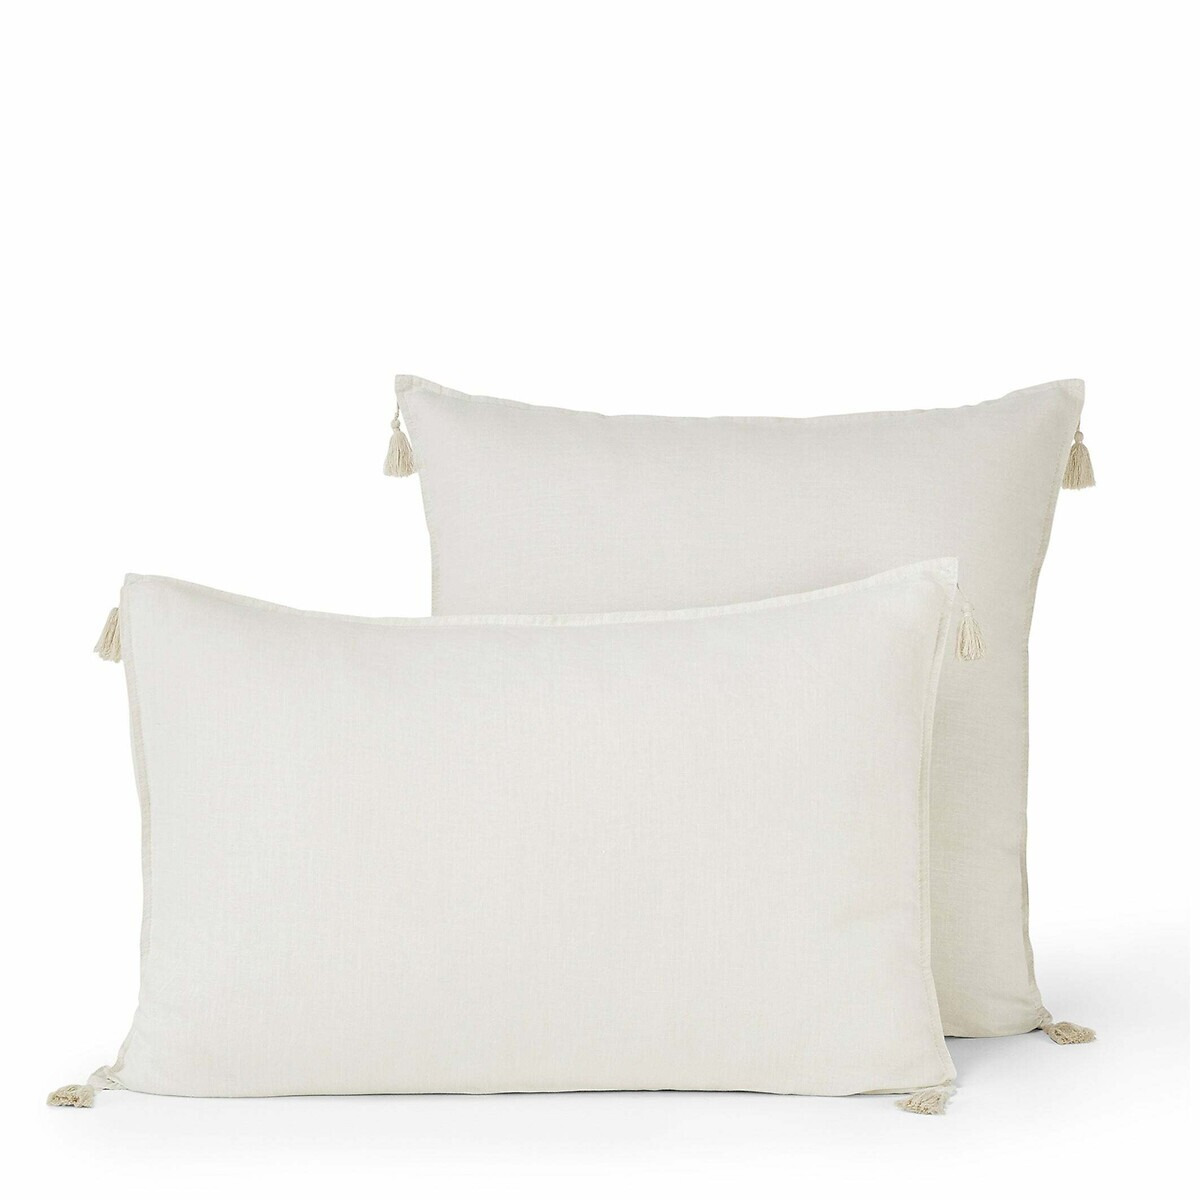 Carly Tassel 100% Washed Linen Pillowcase - image 1